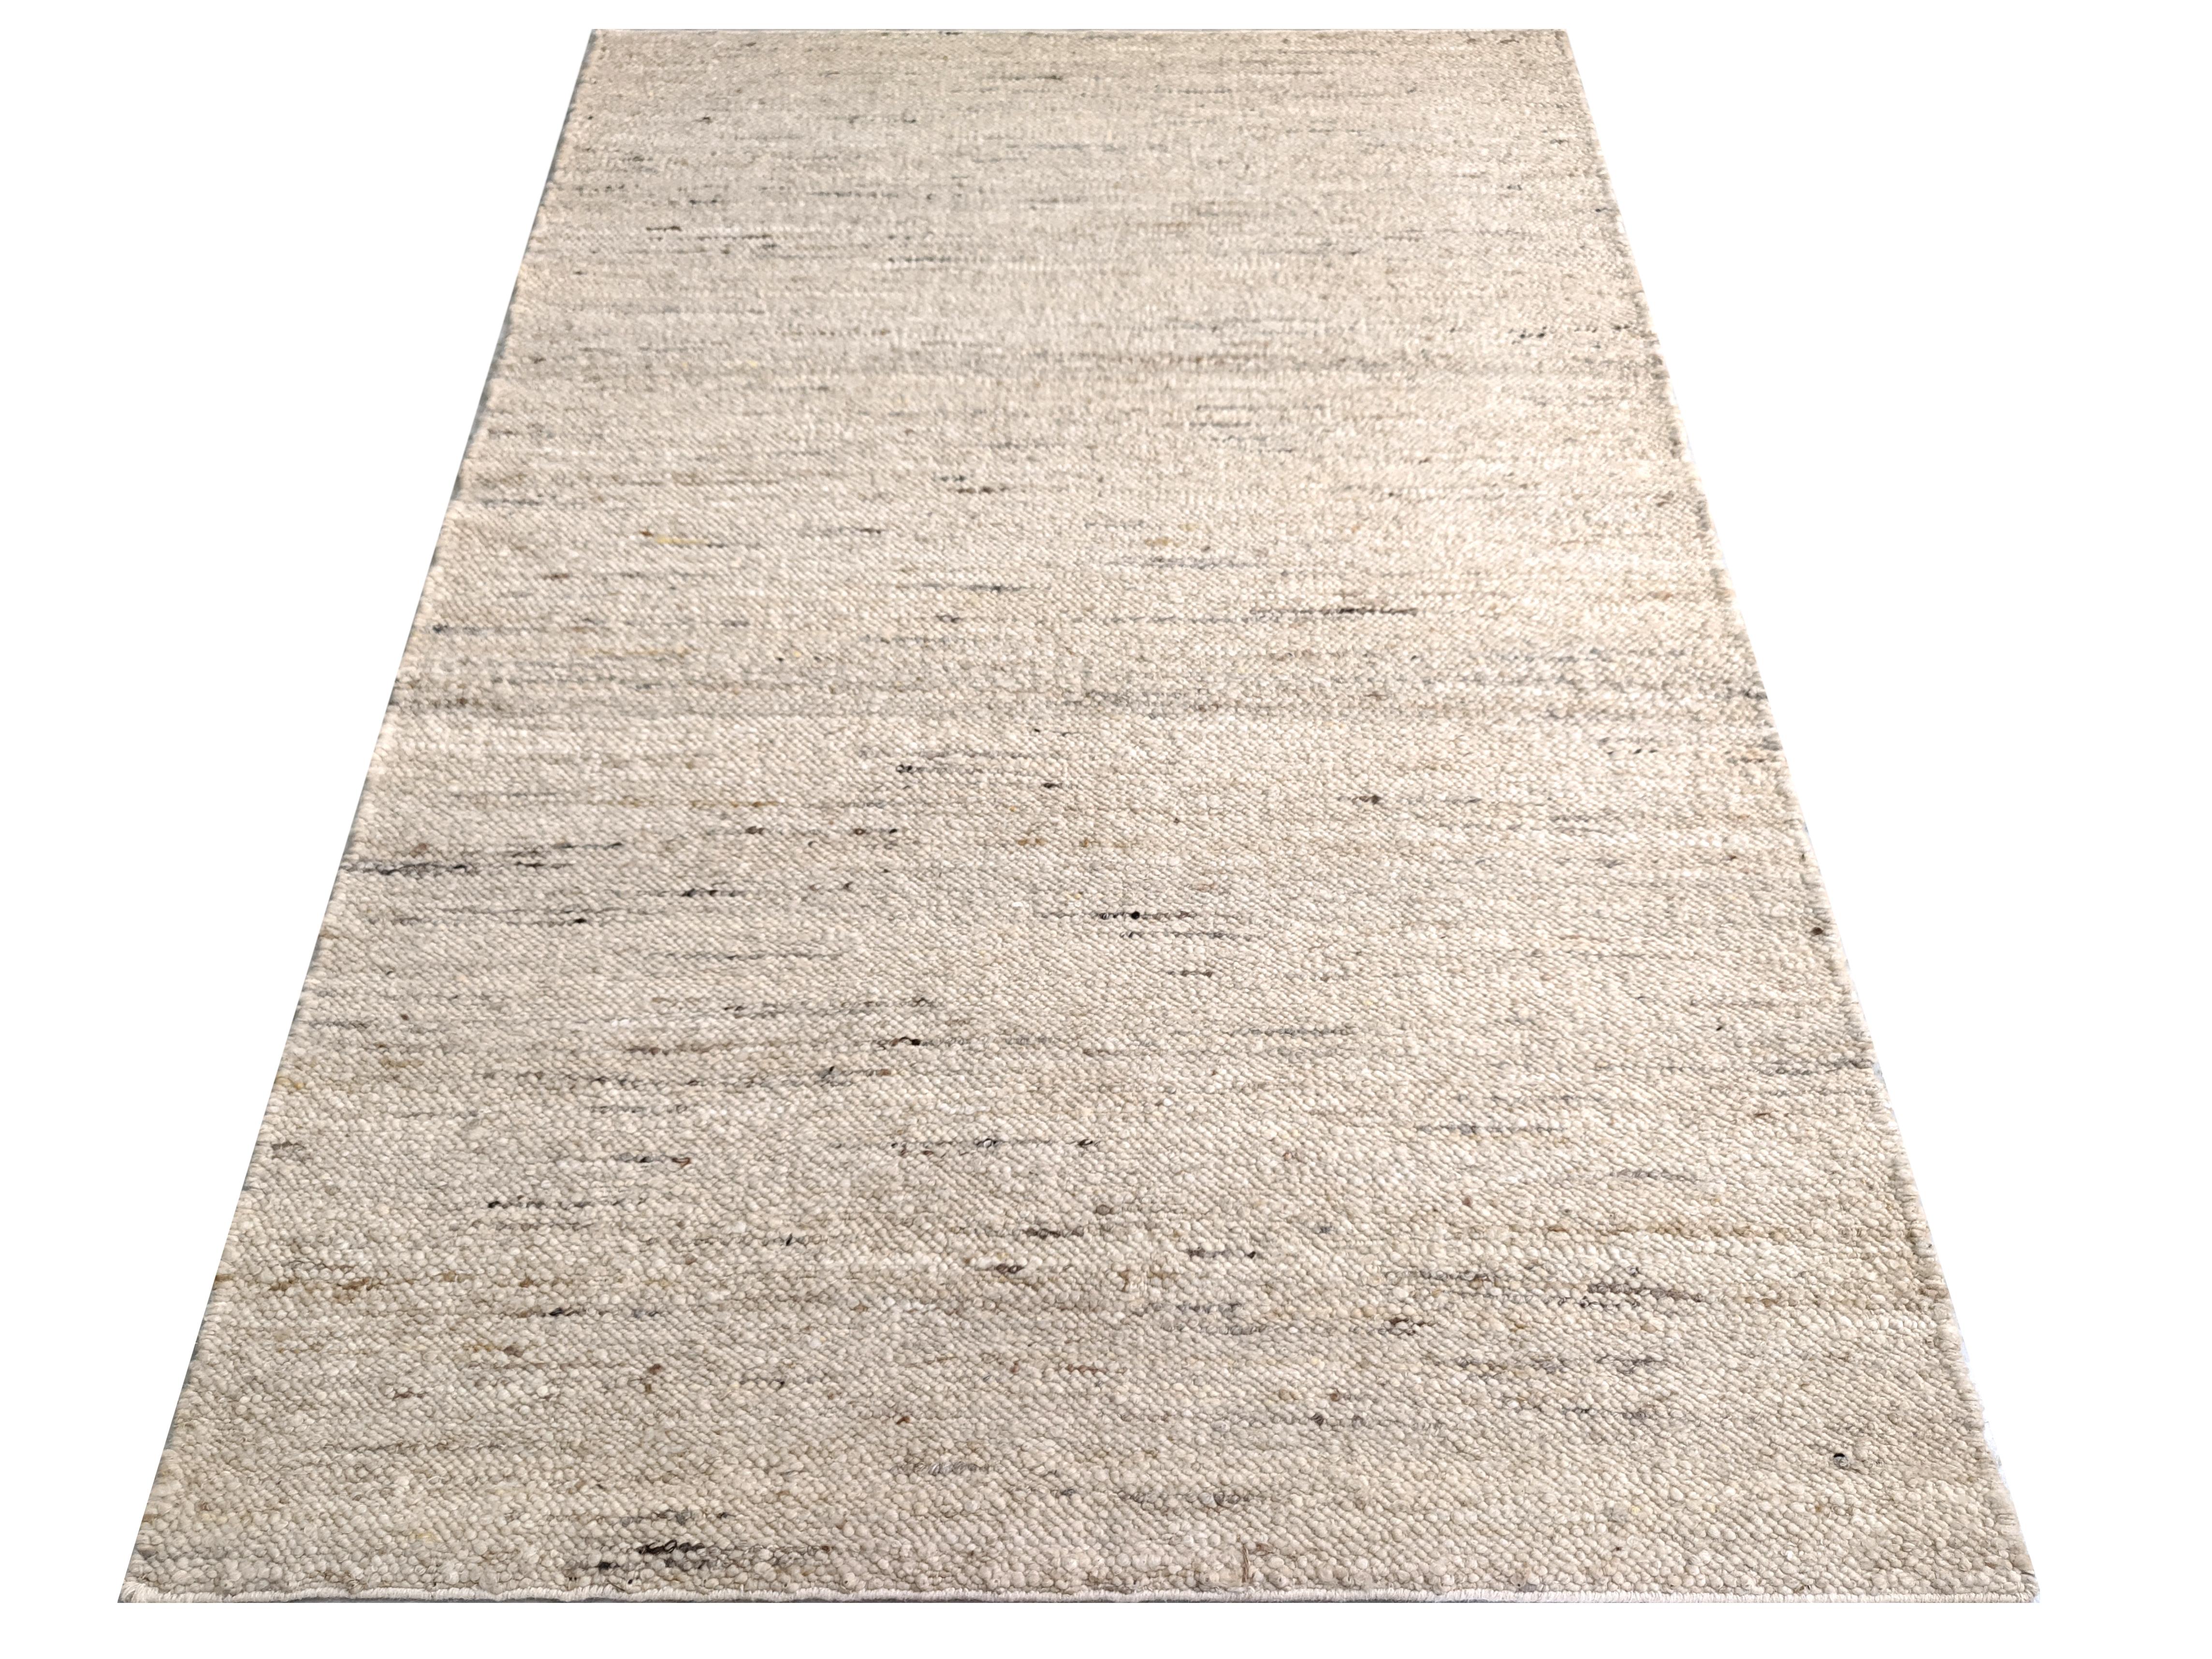 Hand-knotted, flatweave bleached wool.

9' x 12'

New

Origin: India

Field Colors: Multicolored

Accent Colors: Ivory, Light-Brown, Brown, Charcoal, Gray